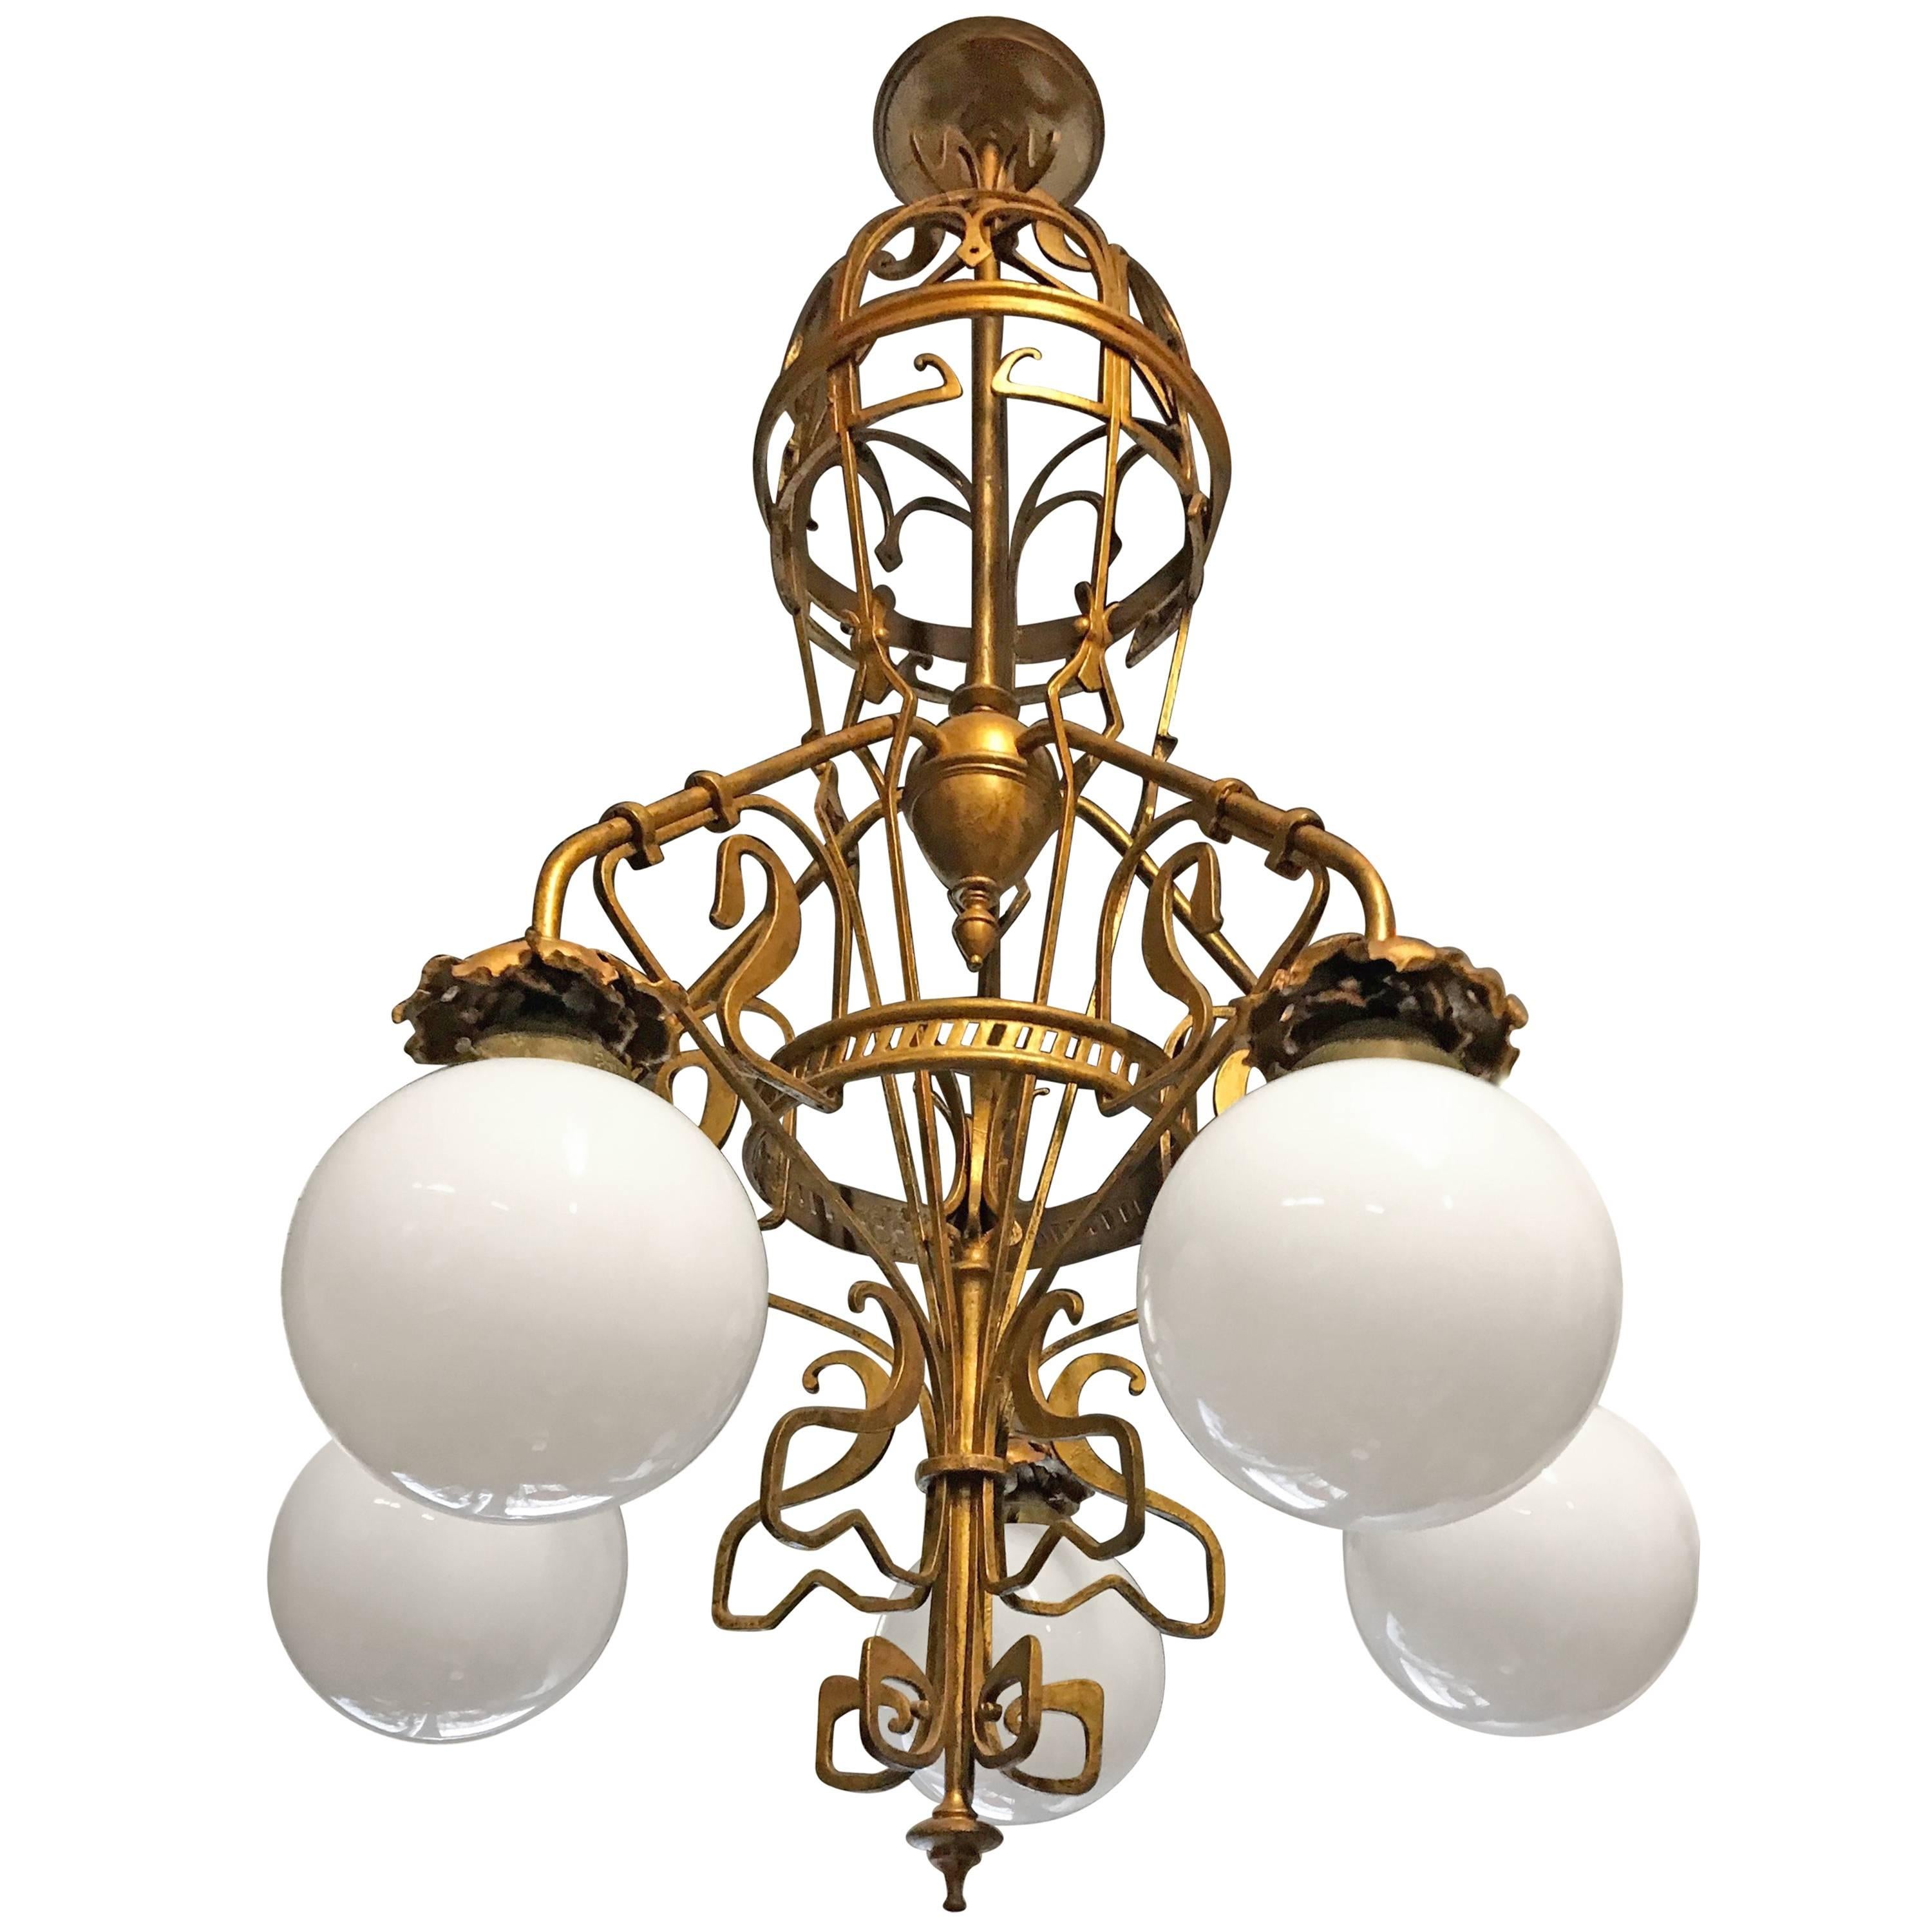 Large Art Nouveau Wrought Iron and Brass Chandelier Gustave Serrurier-Bovy Style